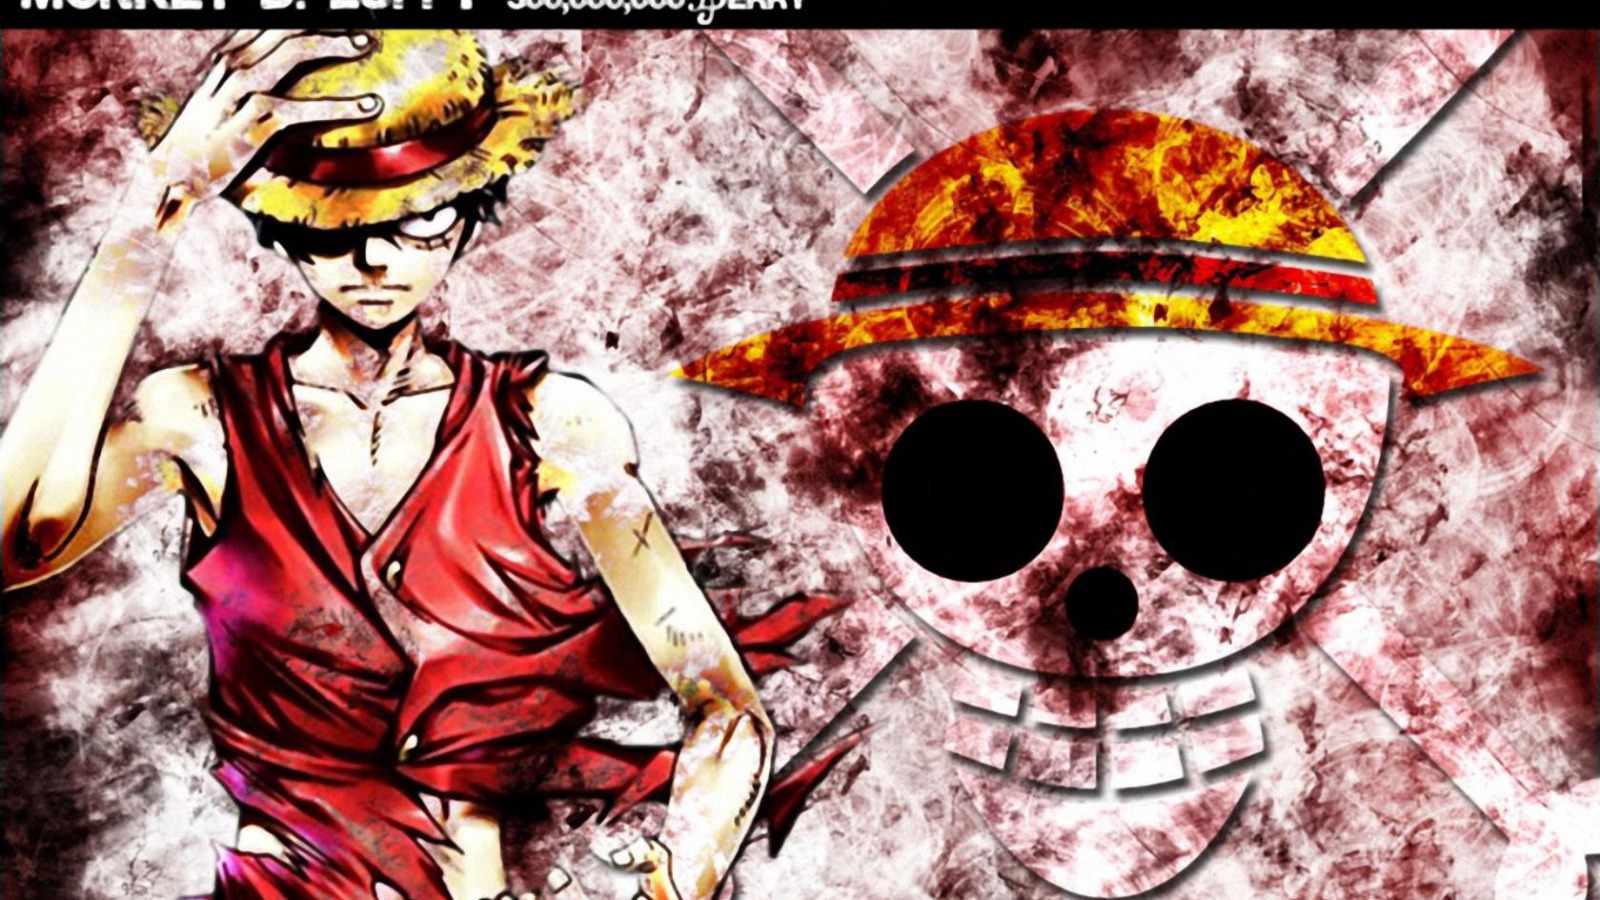 One Piece Laptop Wallpapers